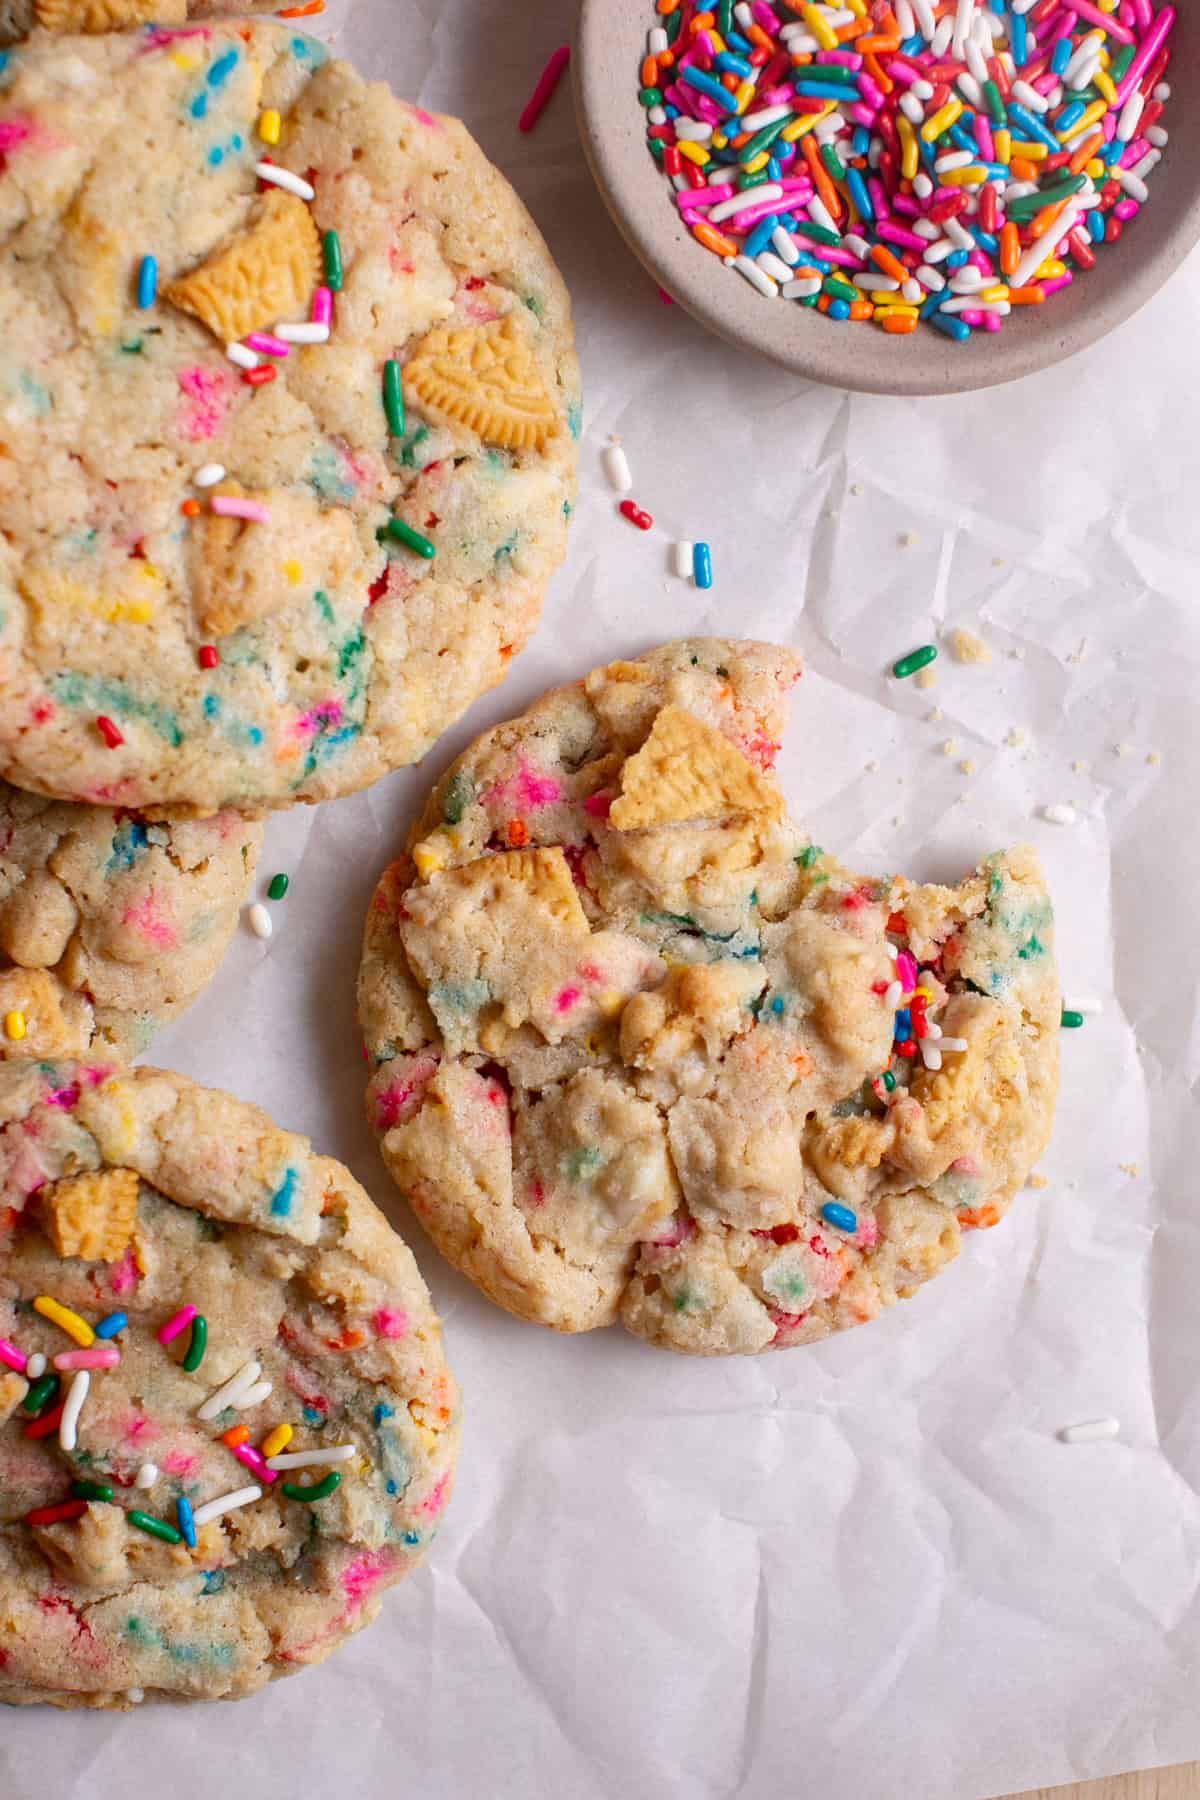 Golden Funfetti Cookies with a bite missing sitting by some crumbs.